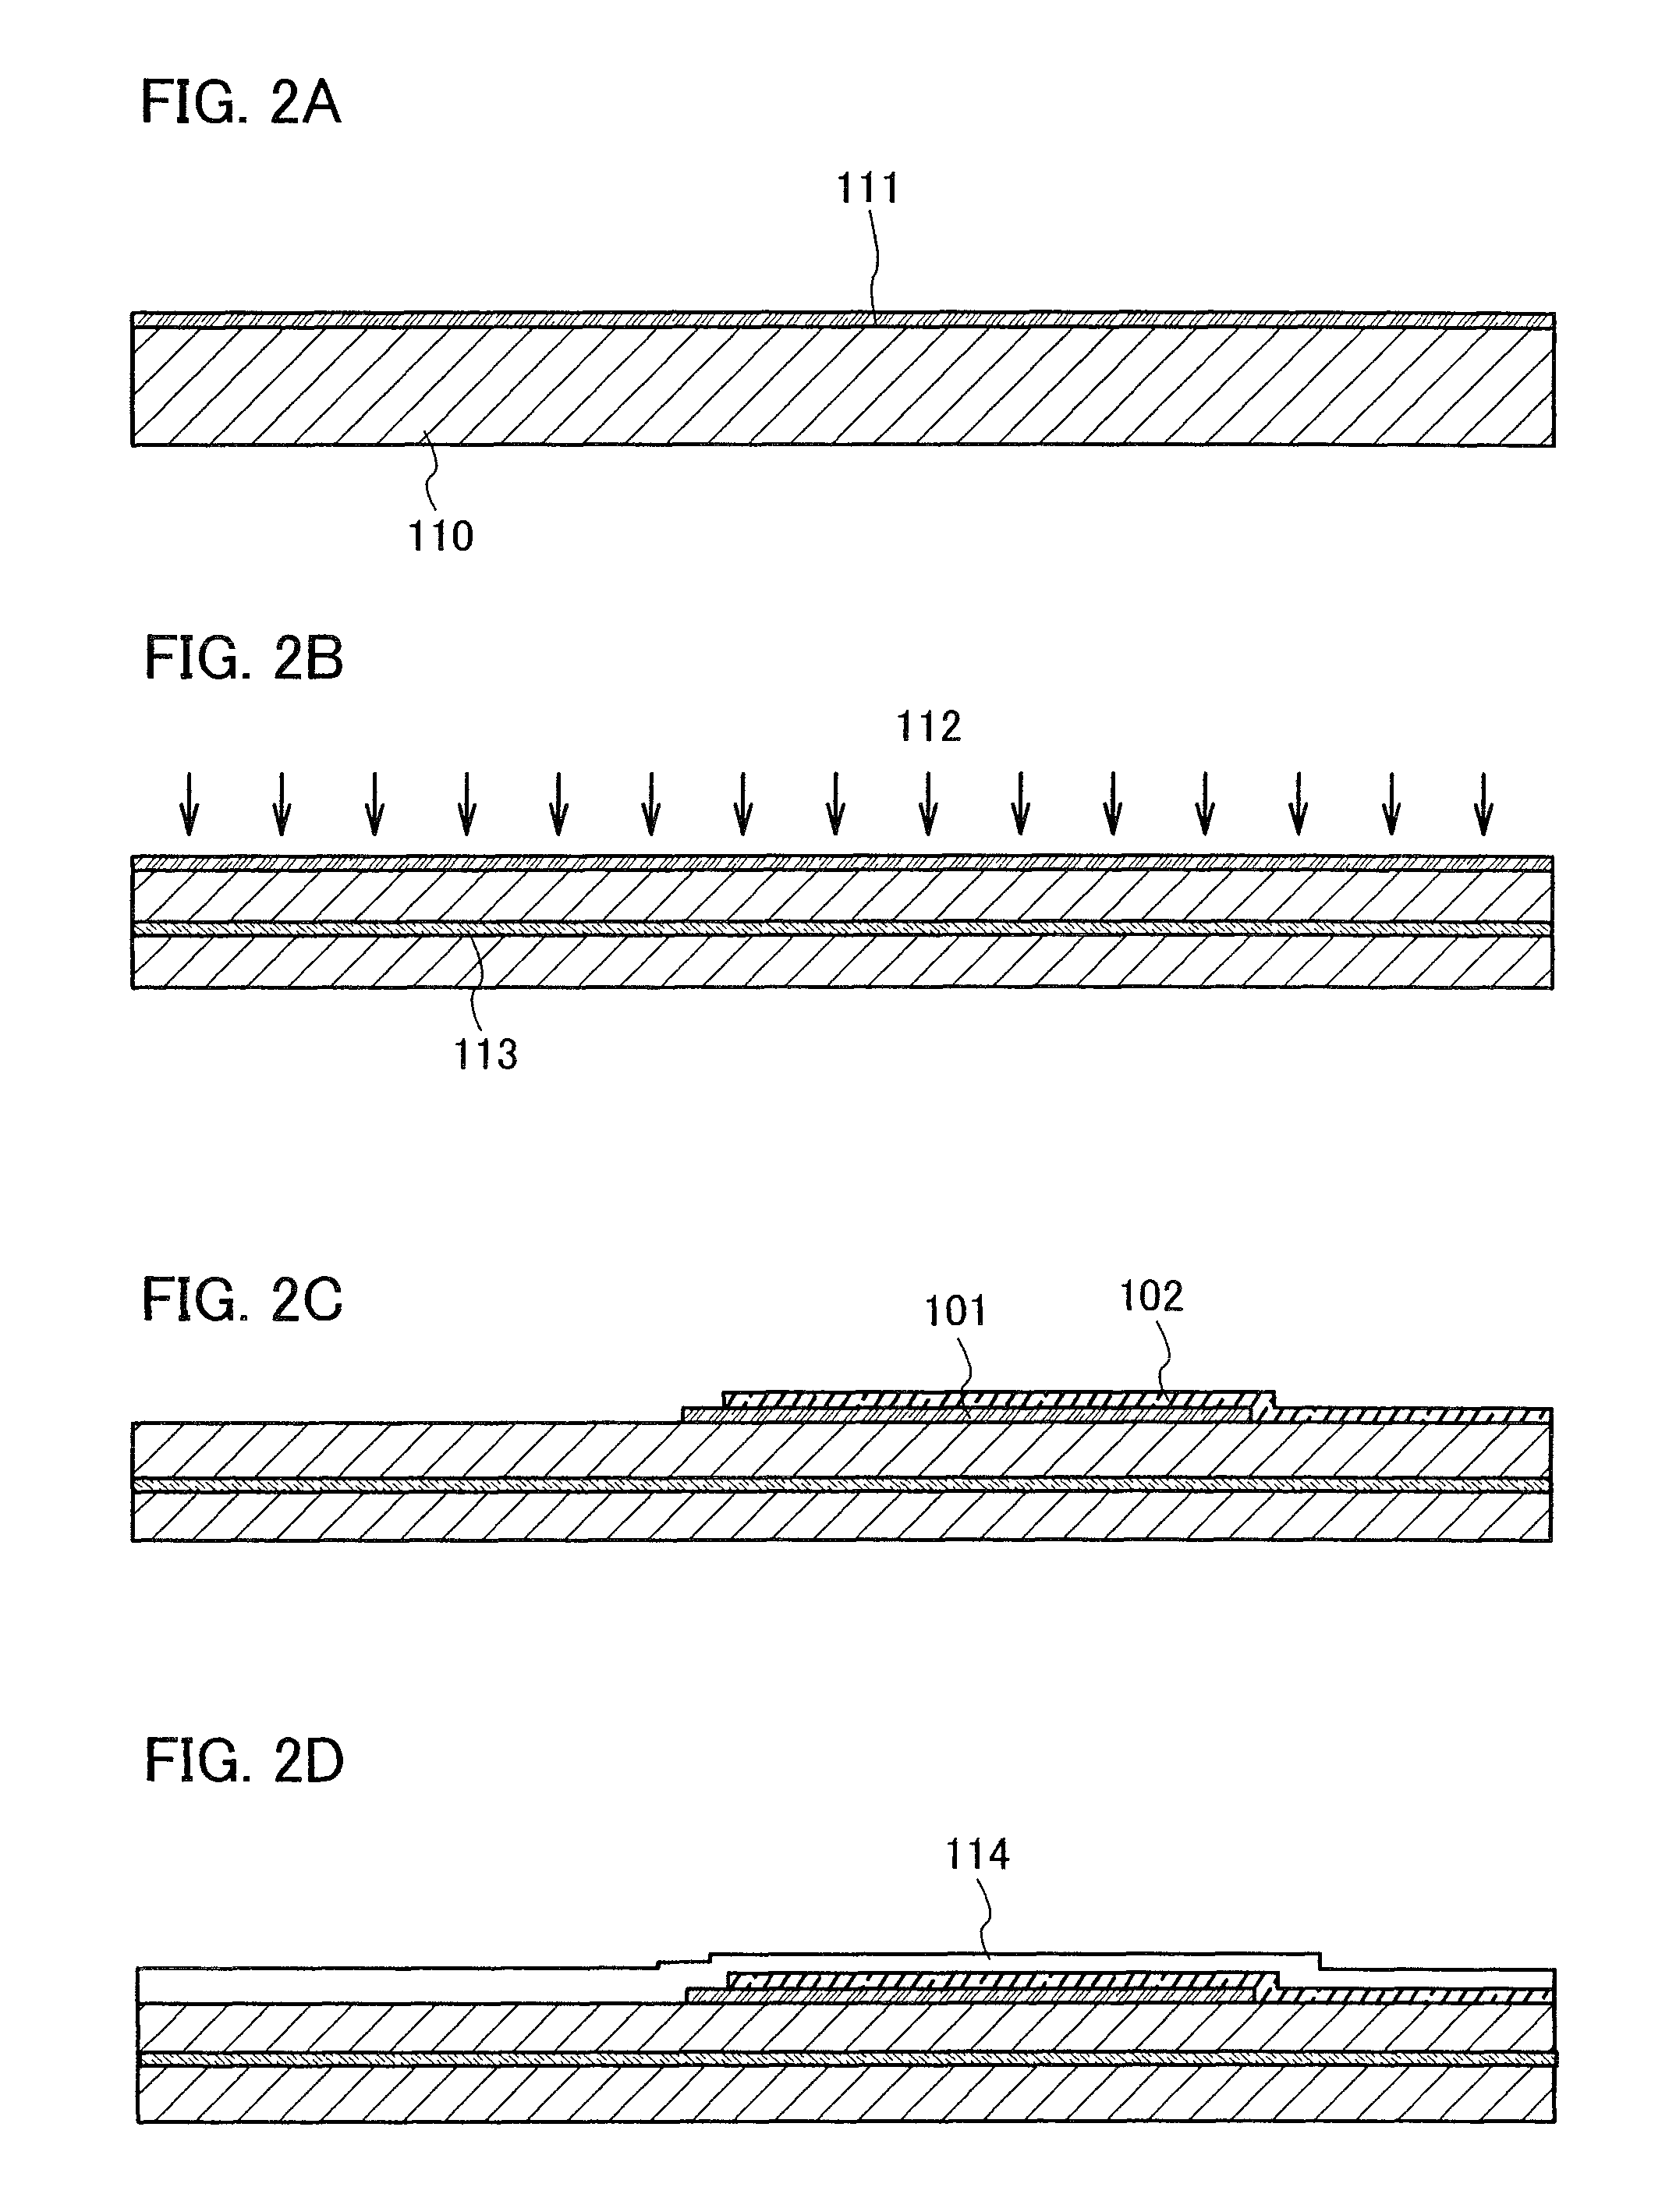 Semiconductor device including storage capacitor with yttrium oxide capacitor dielectric